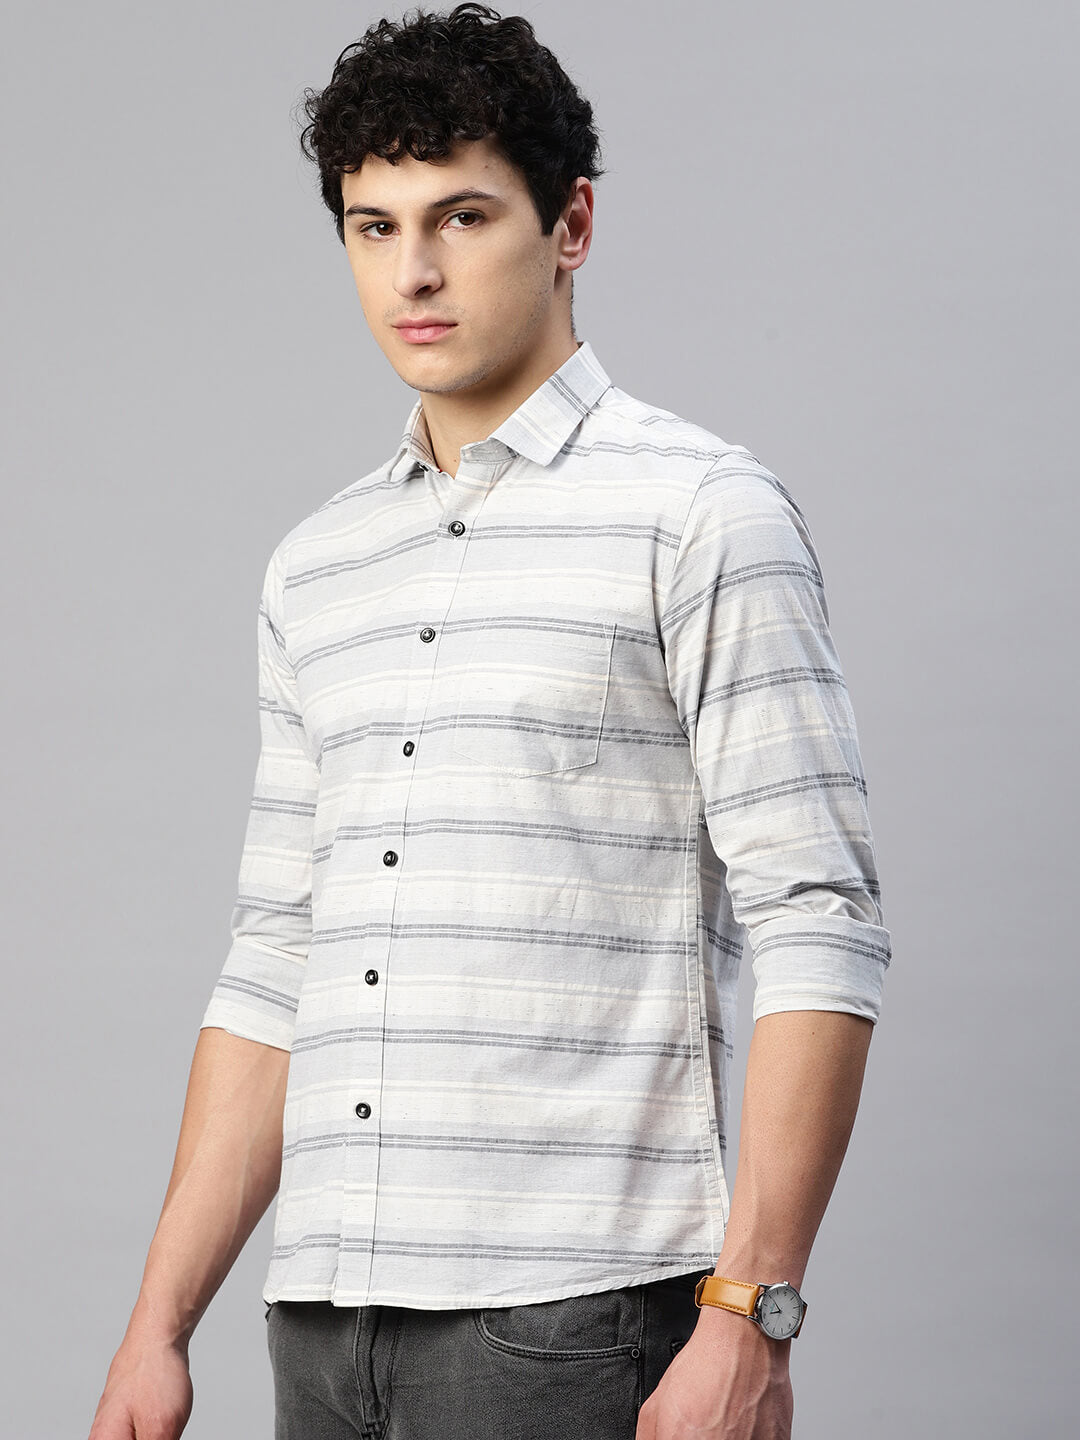 5thanfold Men's Pure Cotton Casual Full Sleeve Striped Grey Slim Fit Shirt